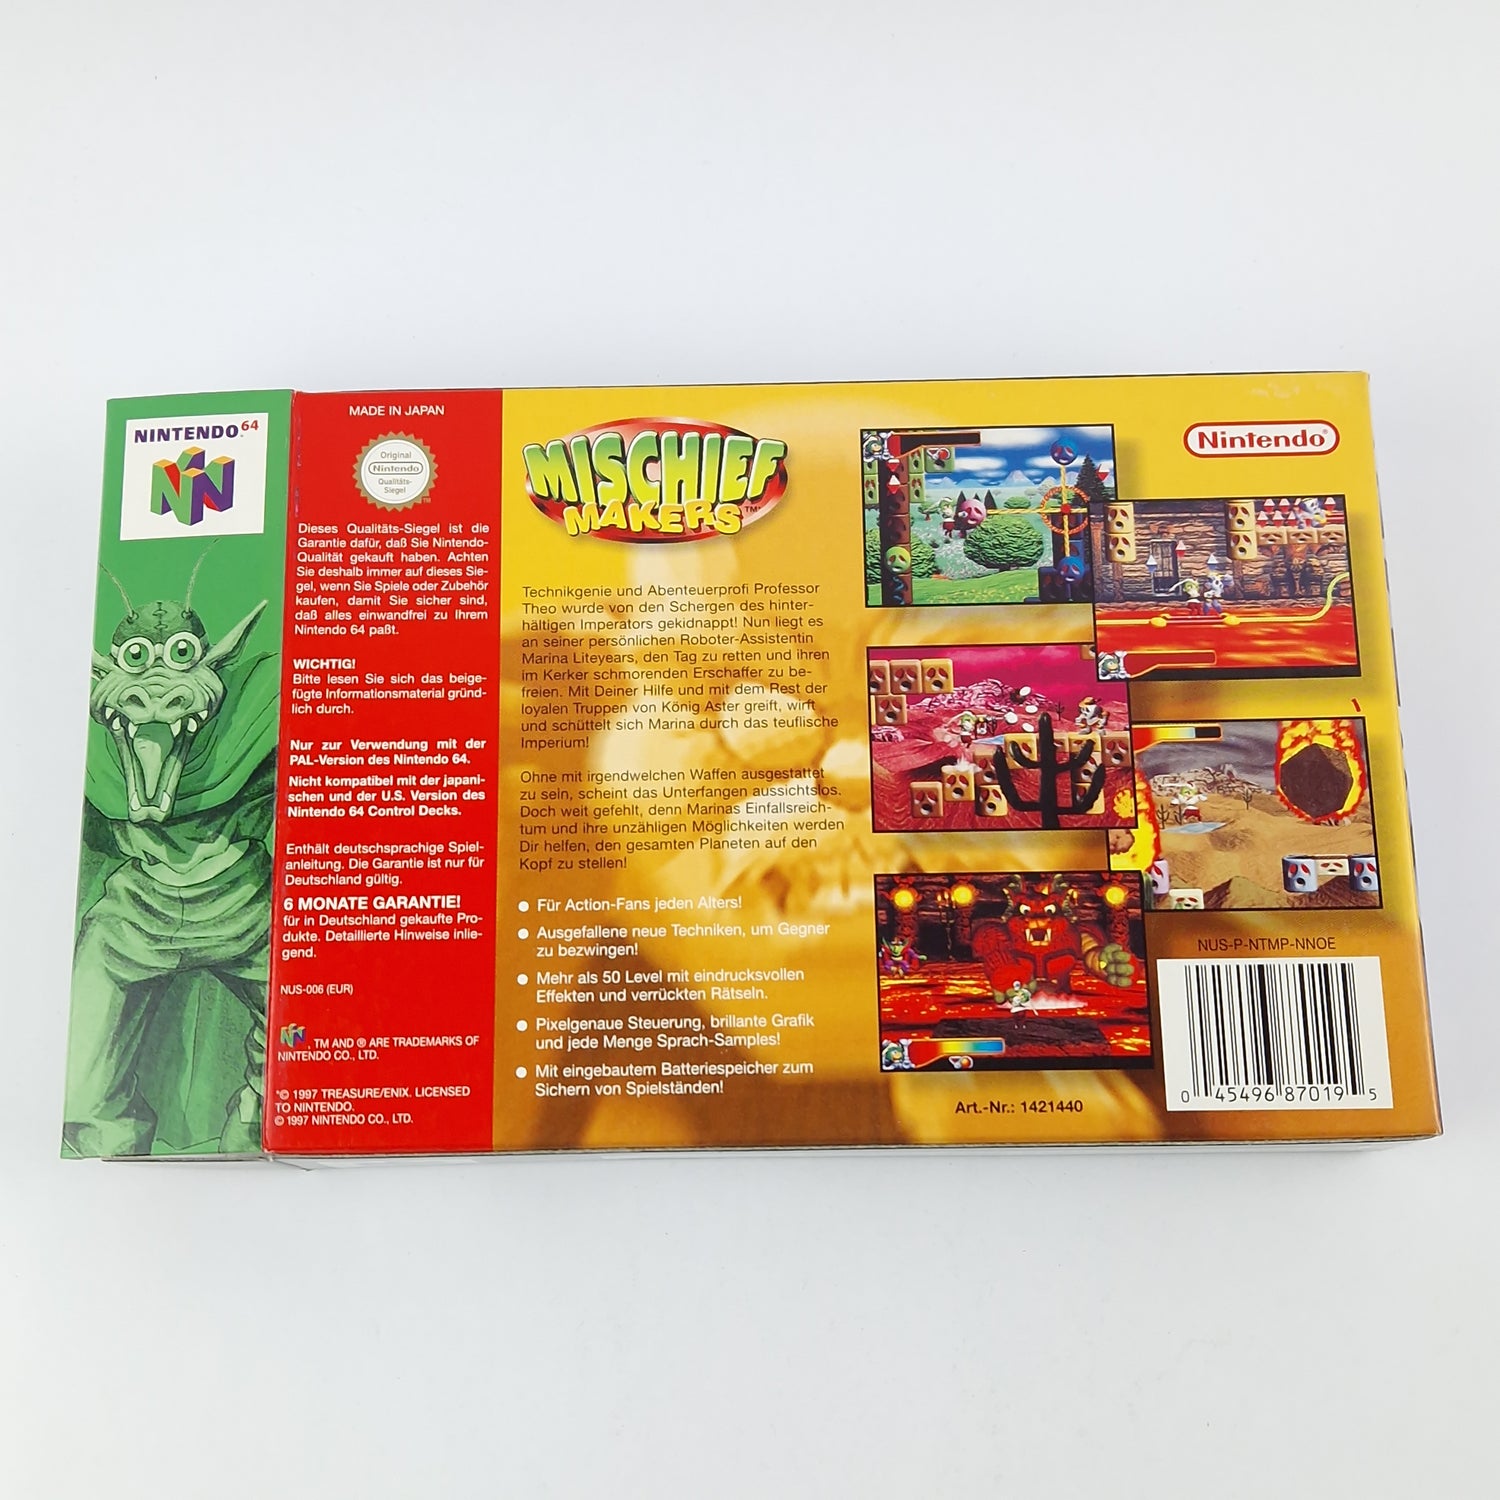 Nintendo 64 Game: Mischief Makers - Module Instructions OVP CIB / N64 PAL Game